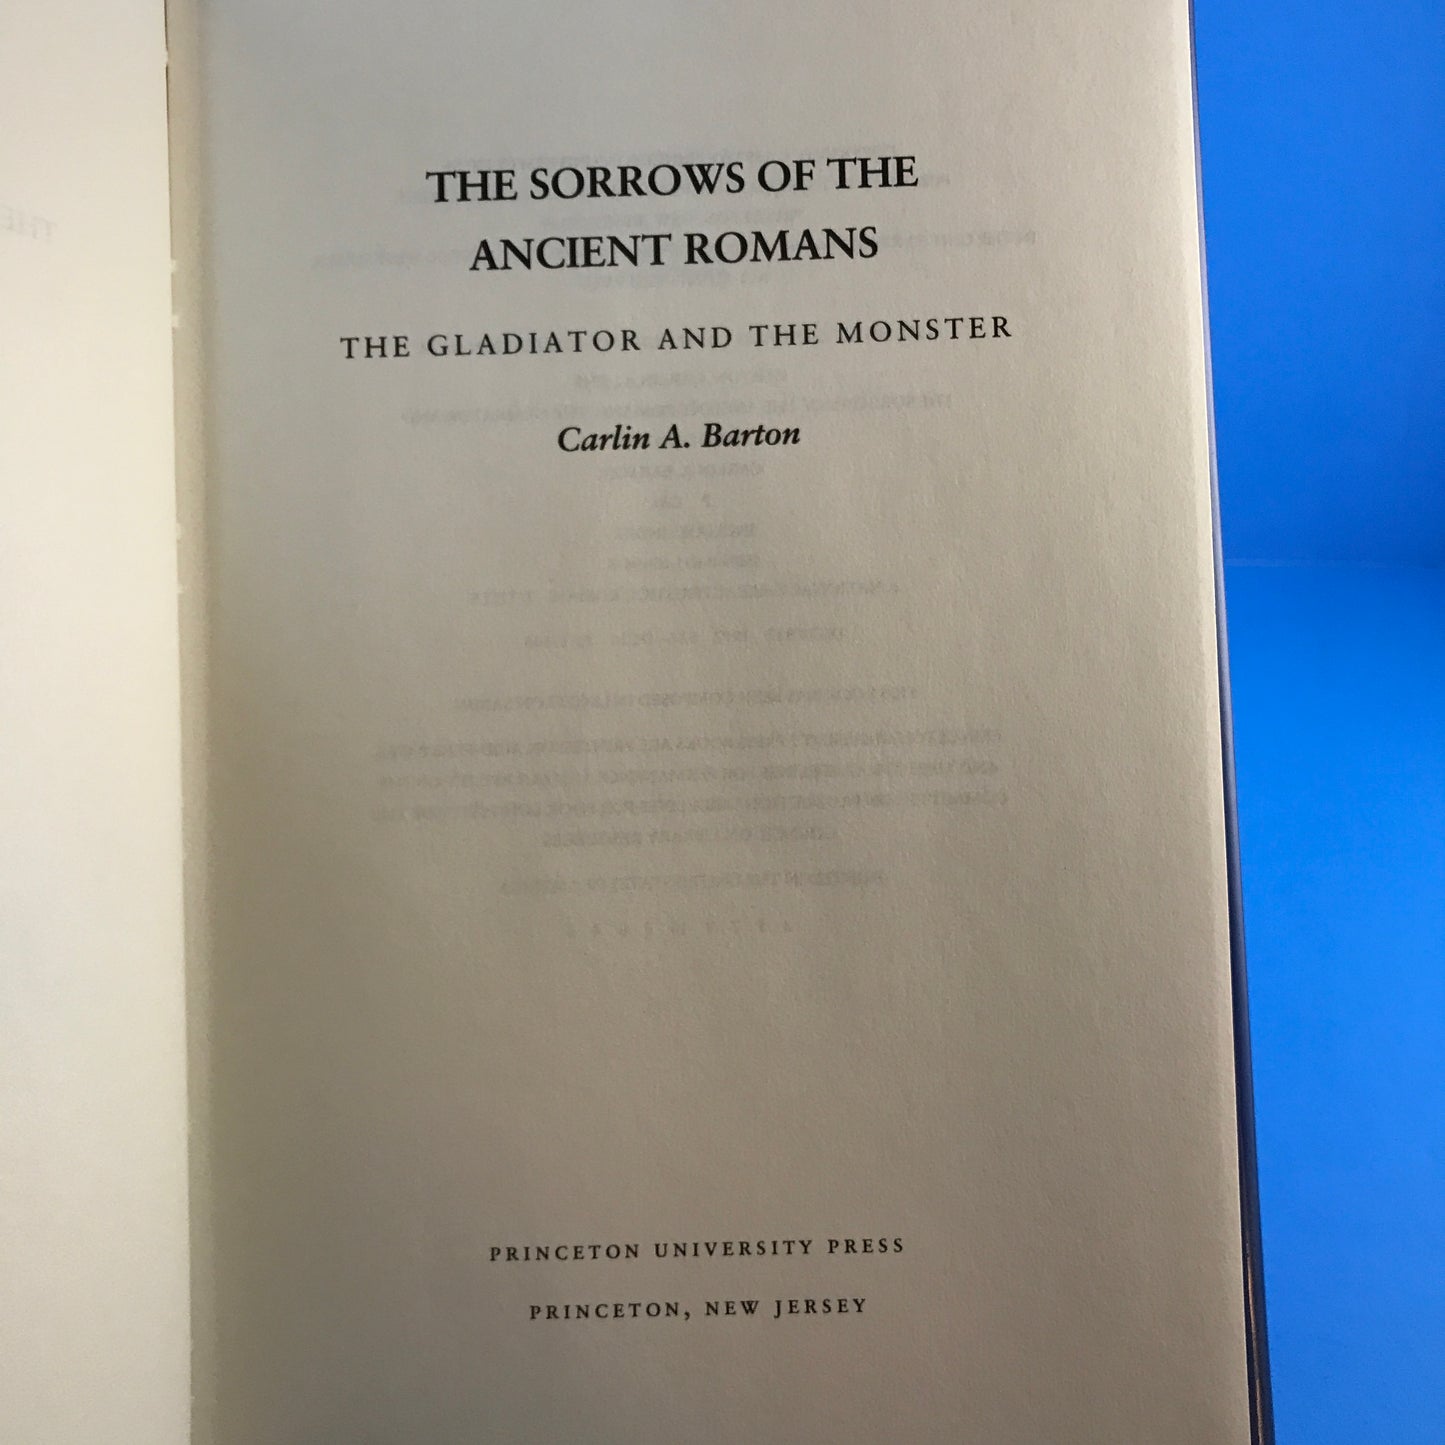 The Sorrows of the Ancient Romans